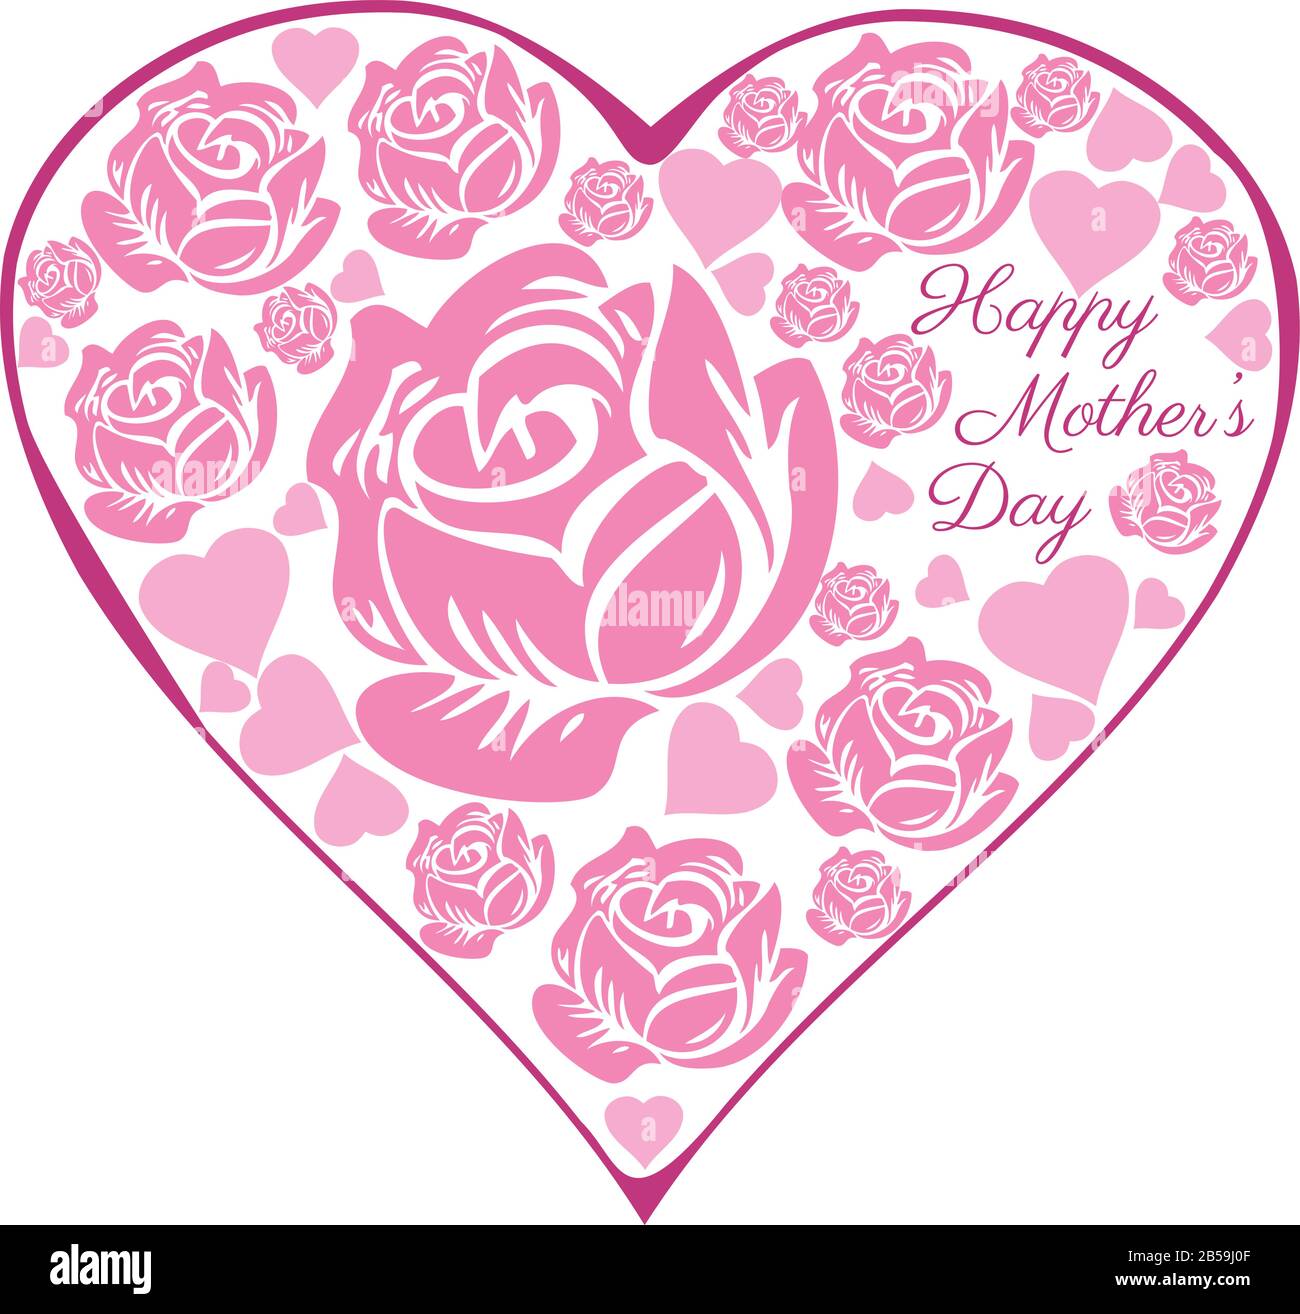 vector floral rose heart. mother's day card. Stock Vector